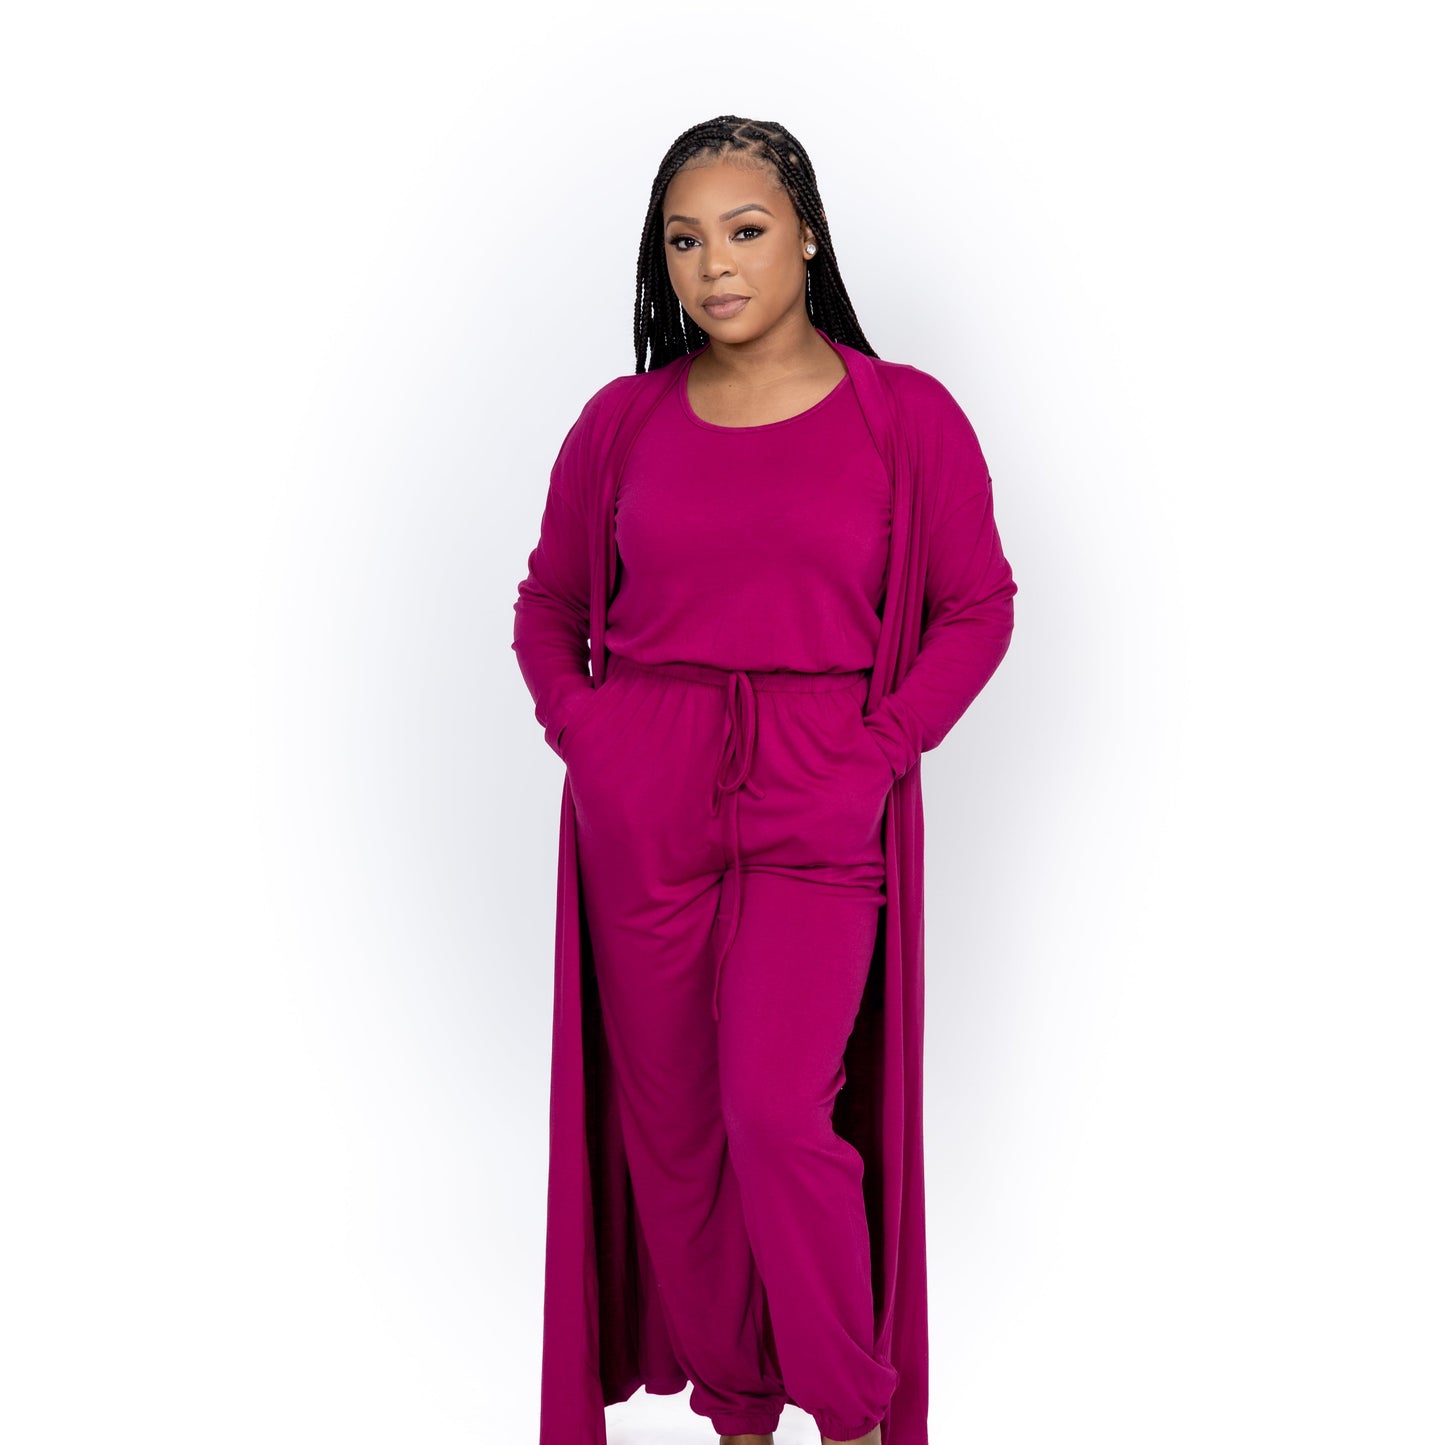 Winter Vibes Jumpsuit and Duster Set For Sale - Fashion Clothing | Upskalez